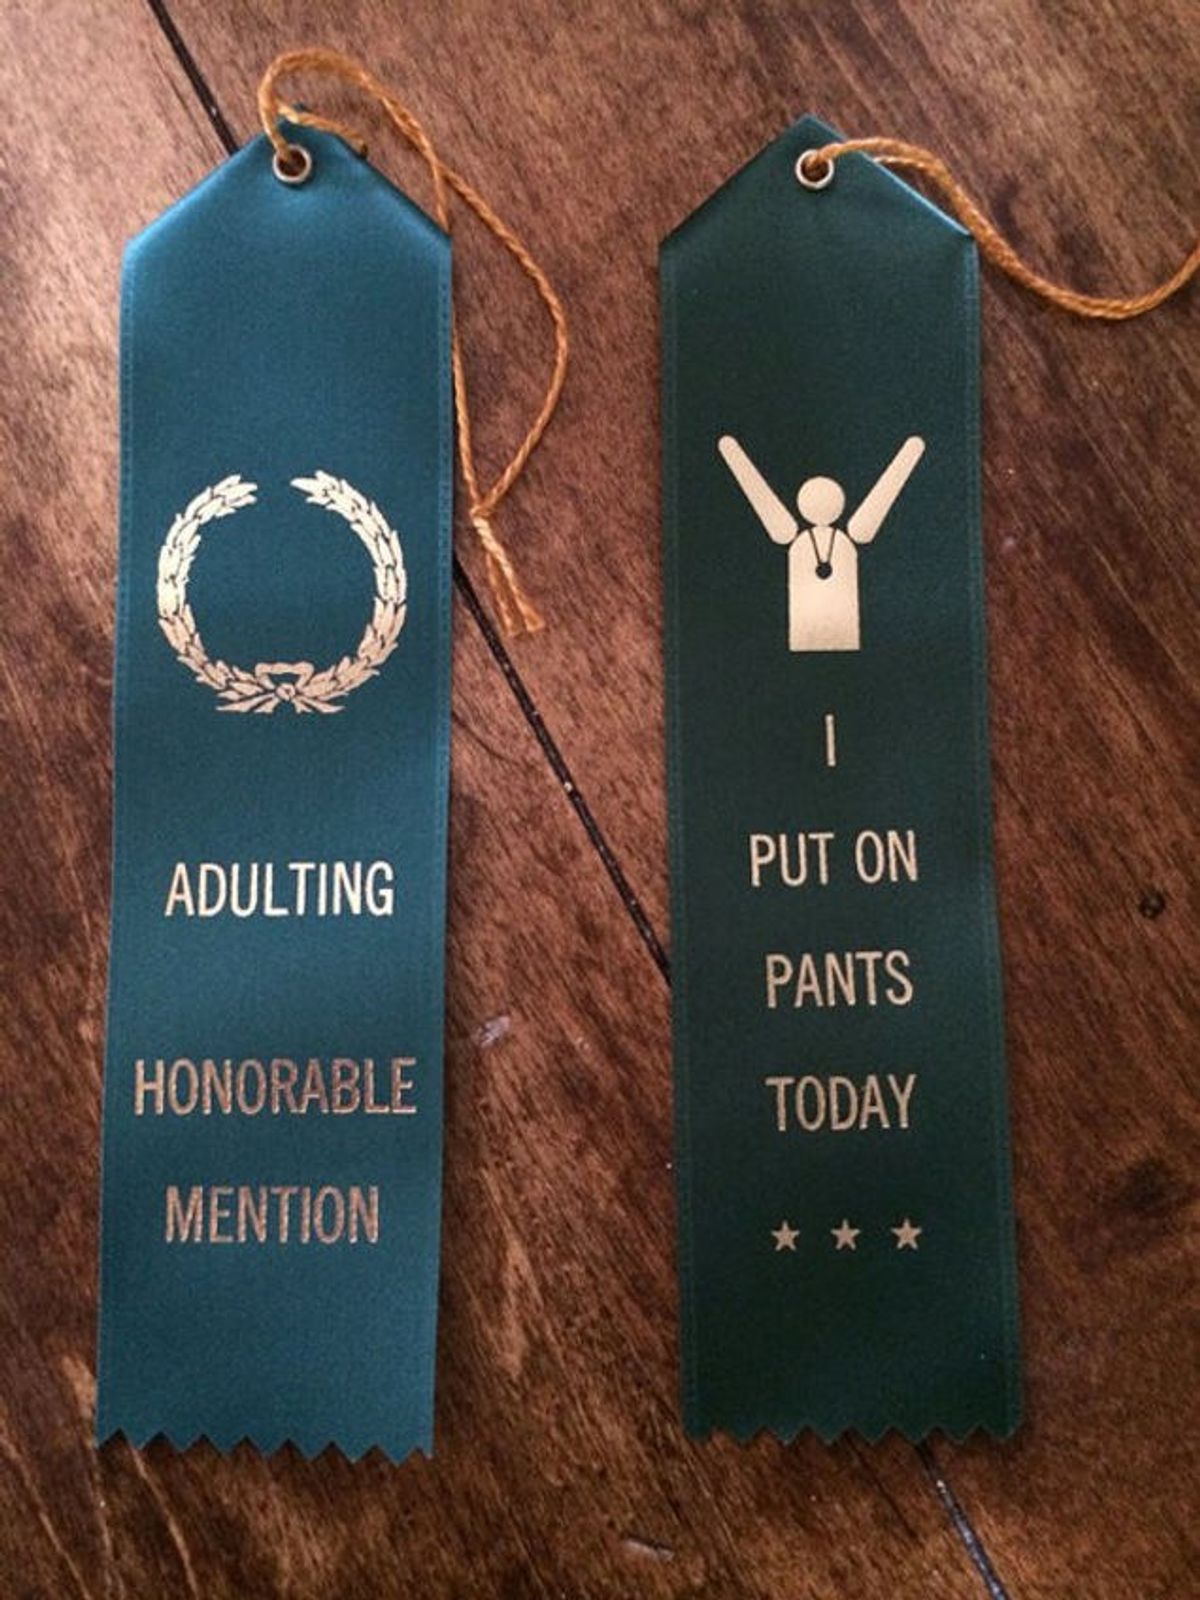 17 Tiny Adulting Victories